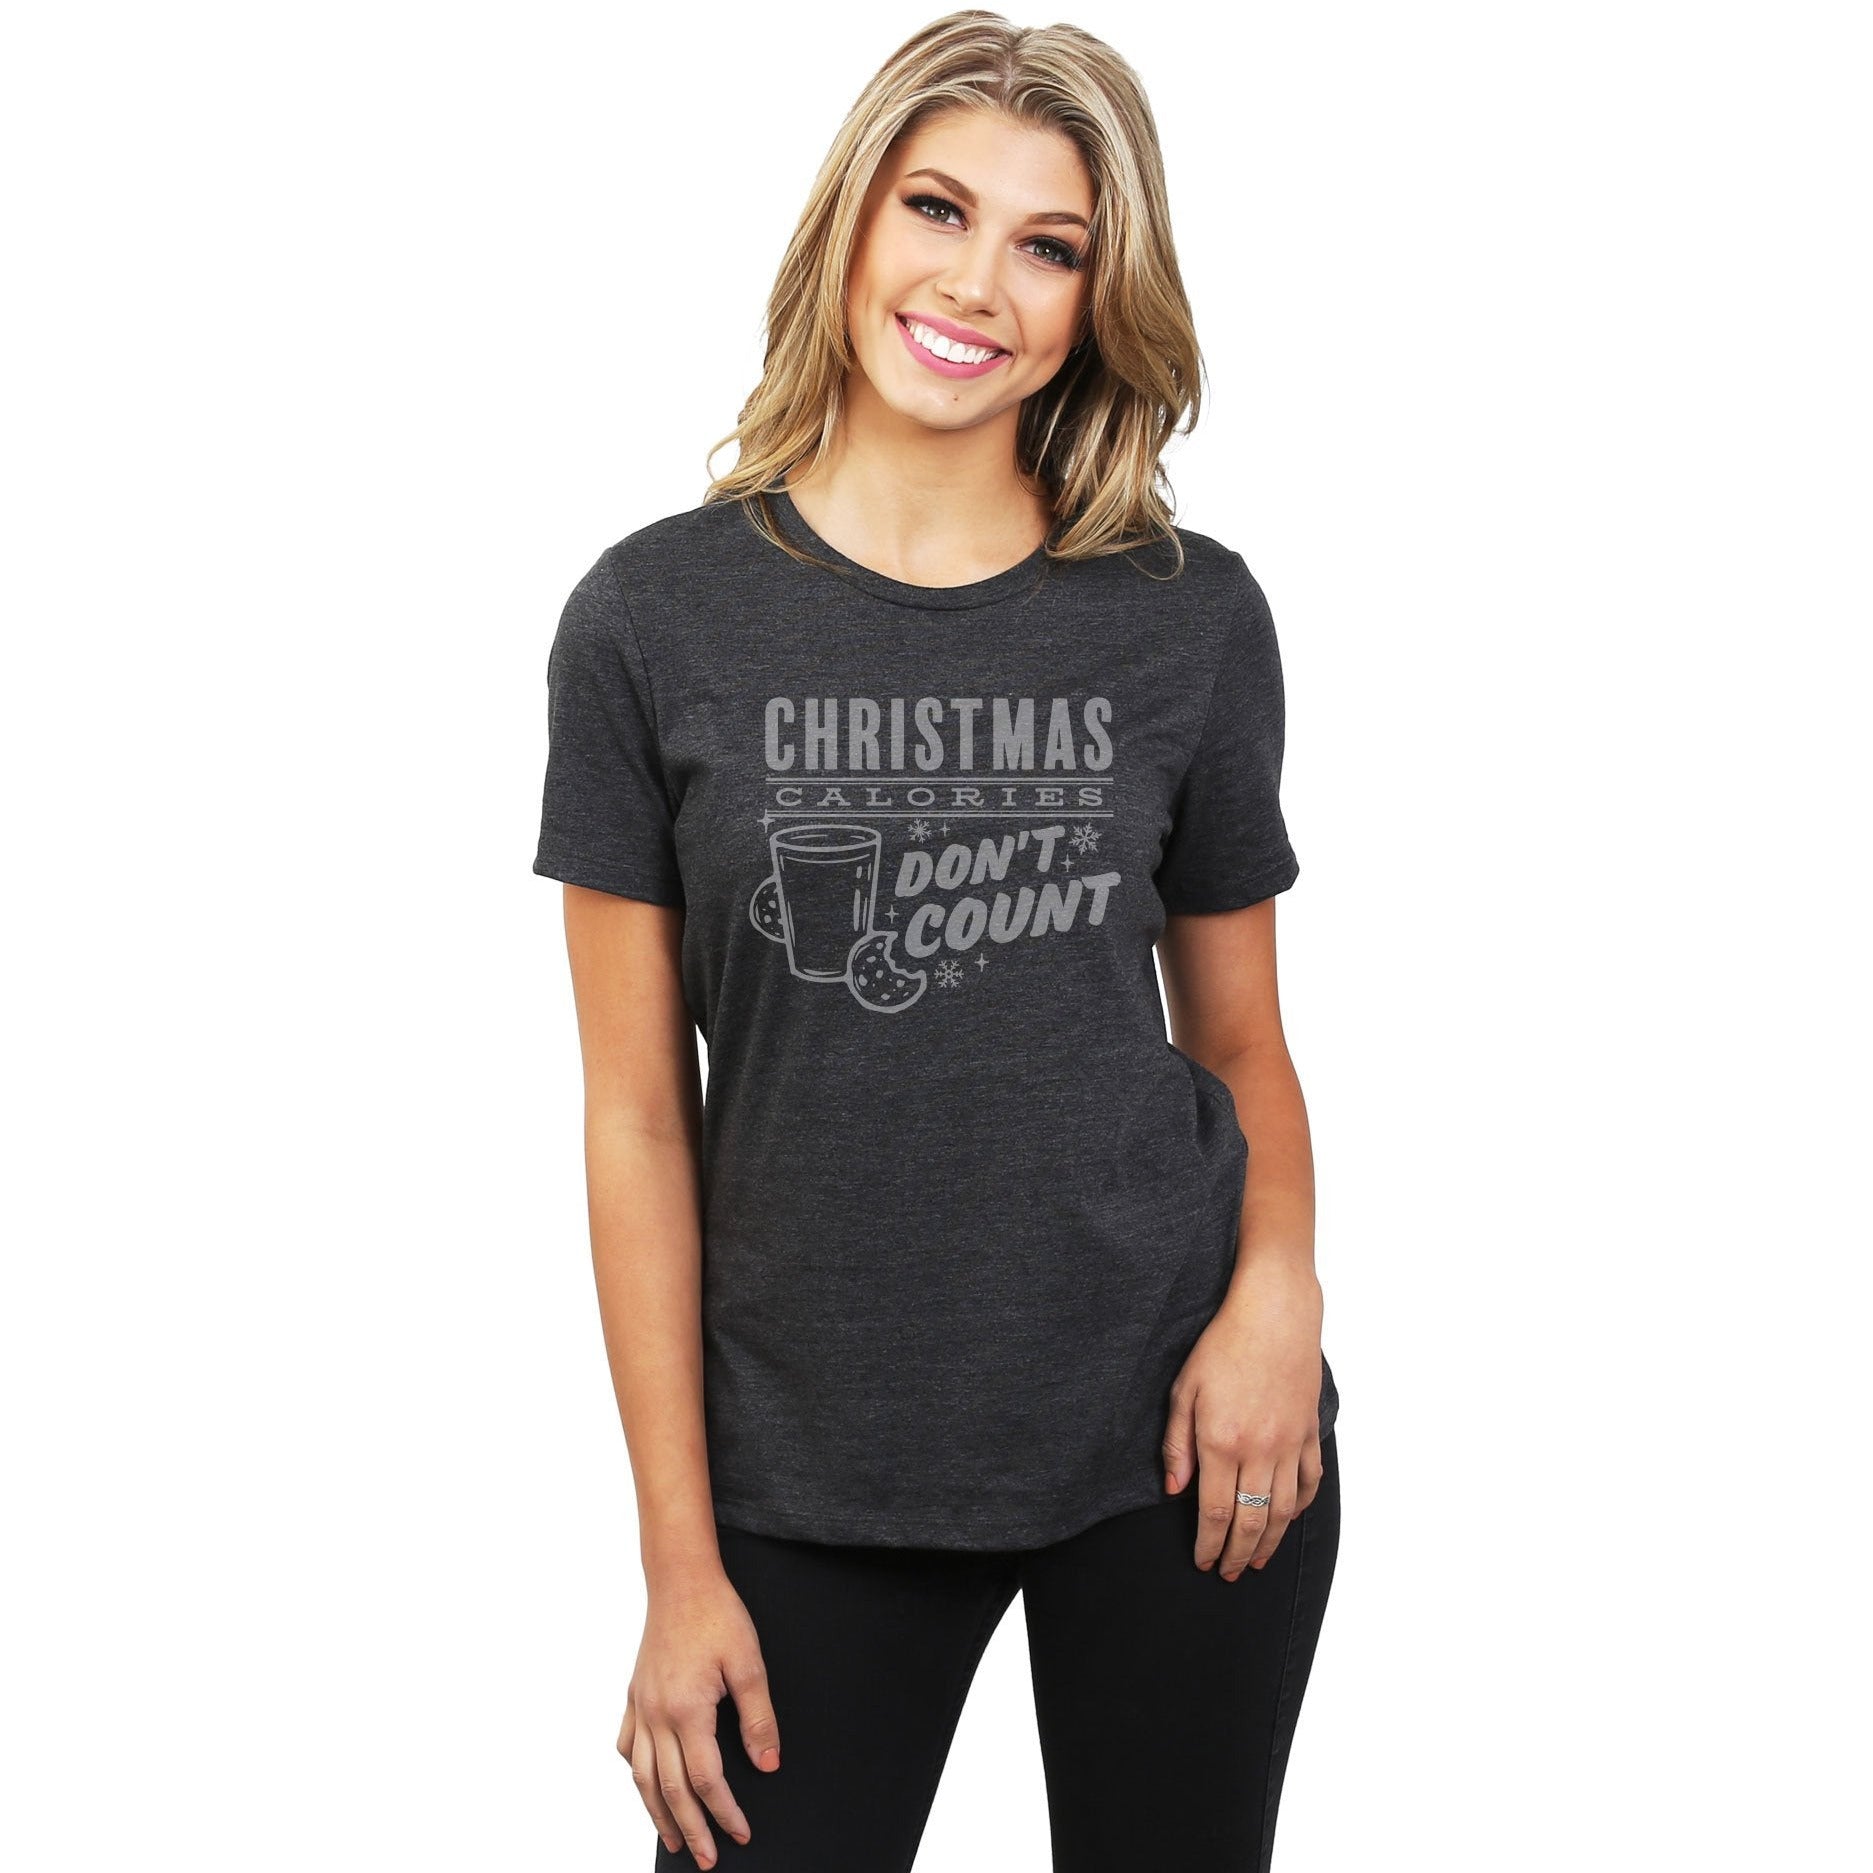 Christmas Calories Don't Count Women's Relaxed Crewneck T-Shirt Top Tee Charcoal Model
